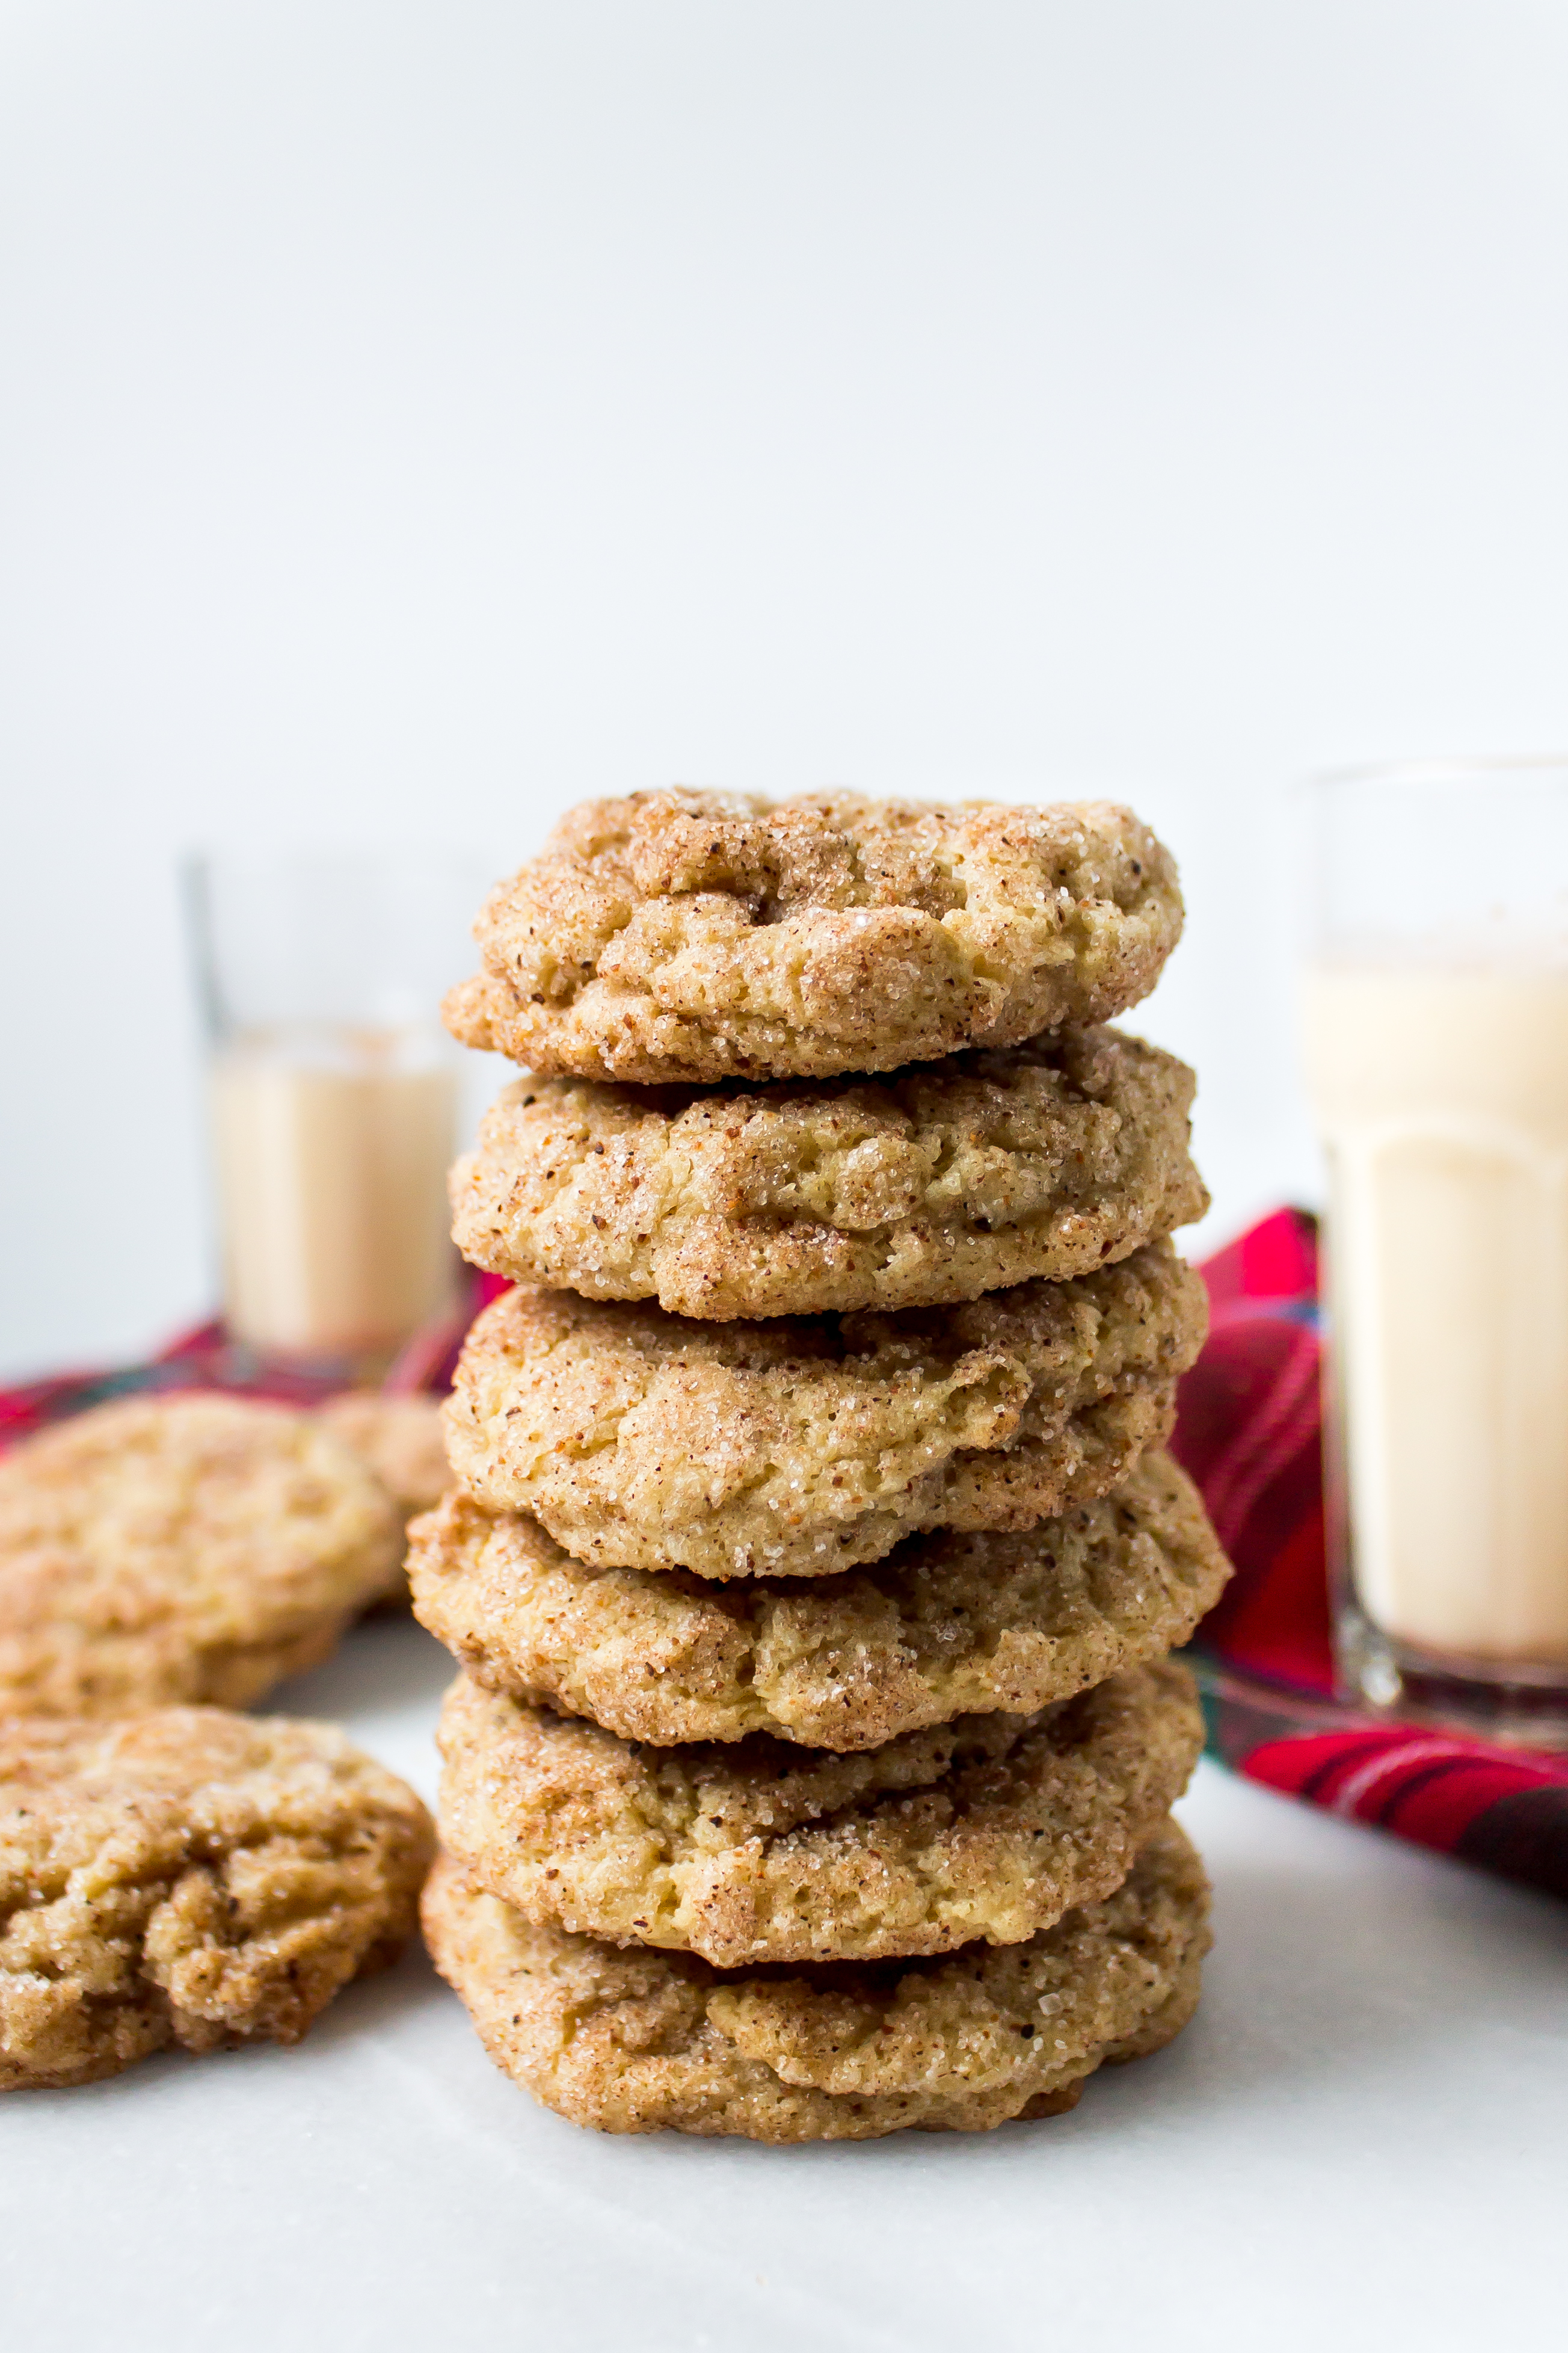 Eggnog snickerdoodles are soft, chewy, and filled with the familiar eggnog and nutmeg flavors. They are the perfect easy cookie to add to your plate of Christmas cookies this year! | Pass the Cookies | www.passthecookies.com